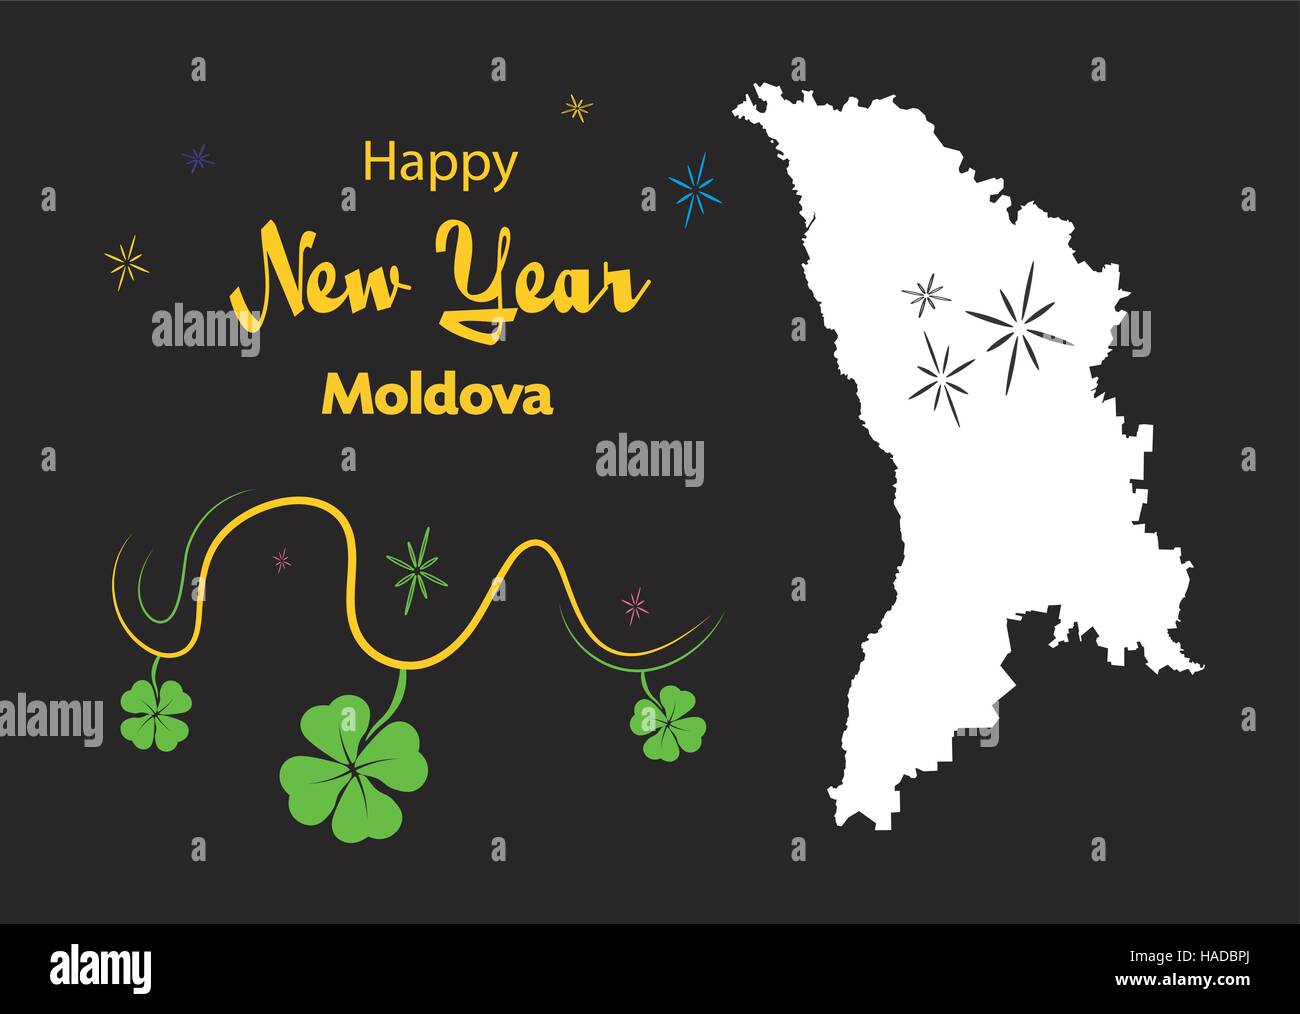 Happy New Year illustration theme with map of Moldova Stock Vector